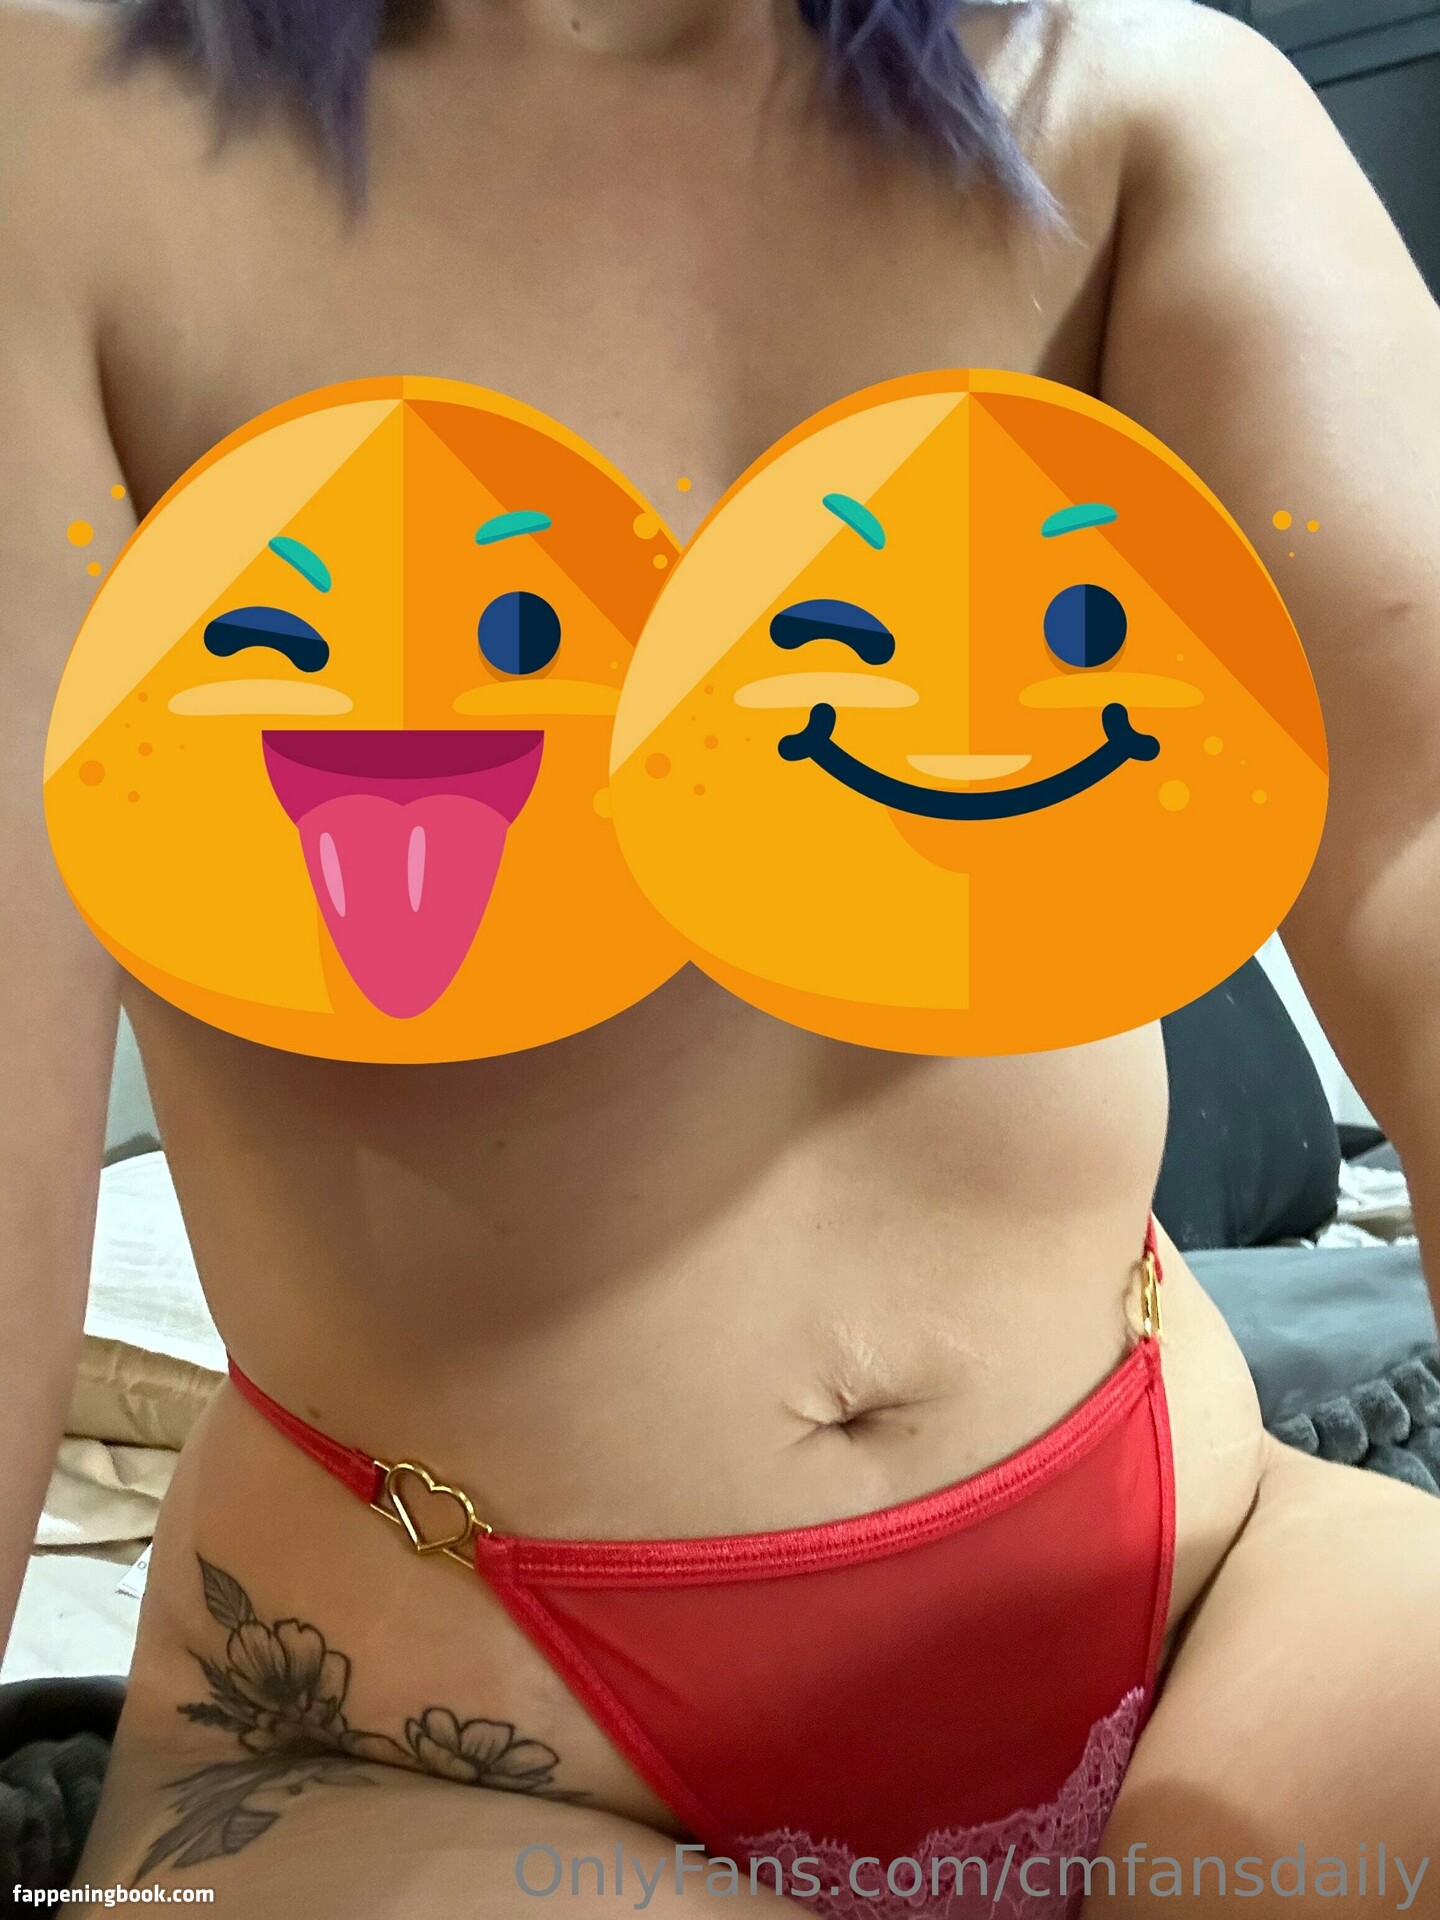 cmfansdaily Nude OnlyFans Leaks